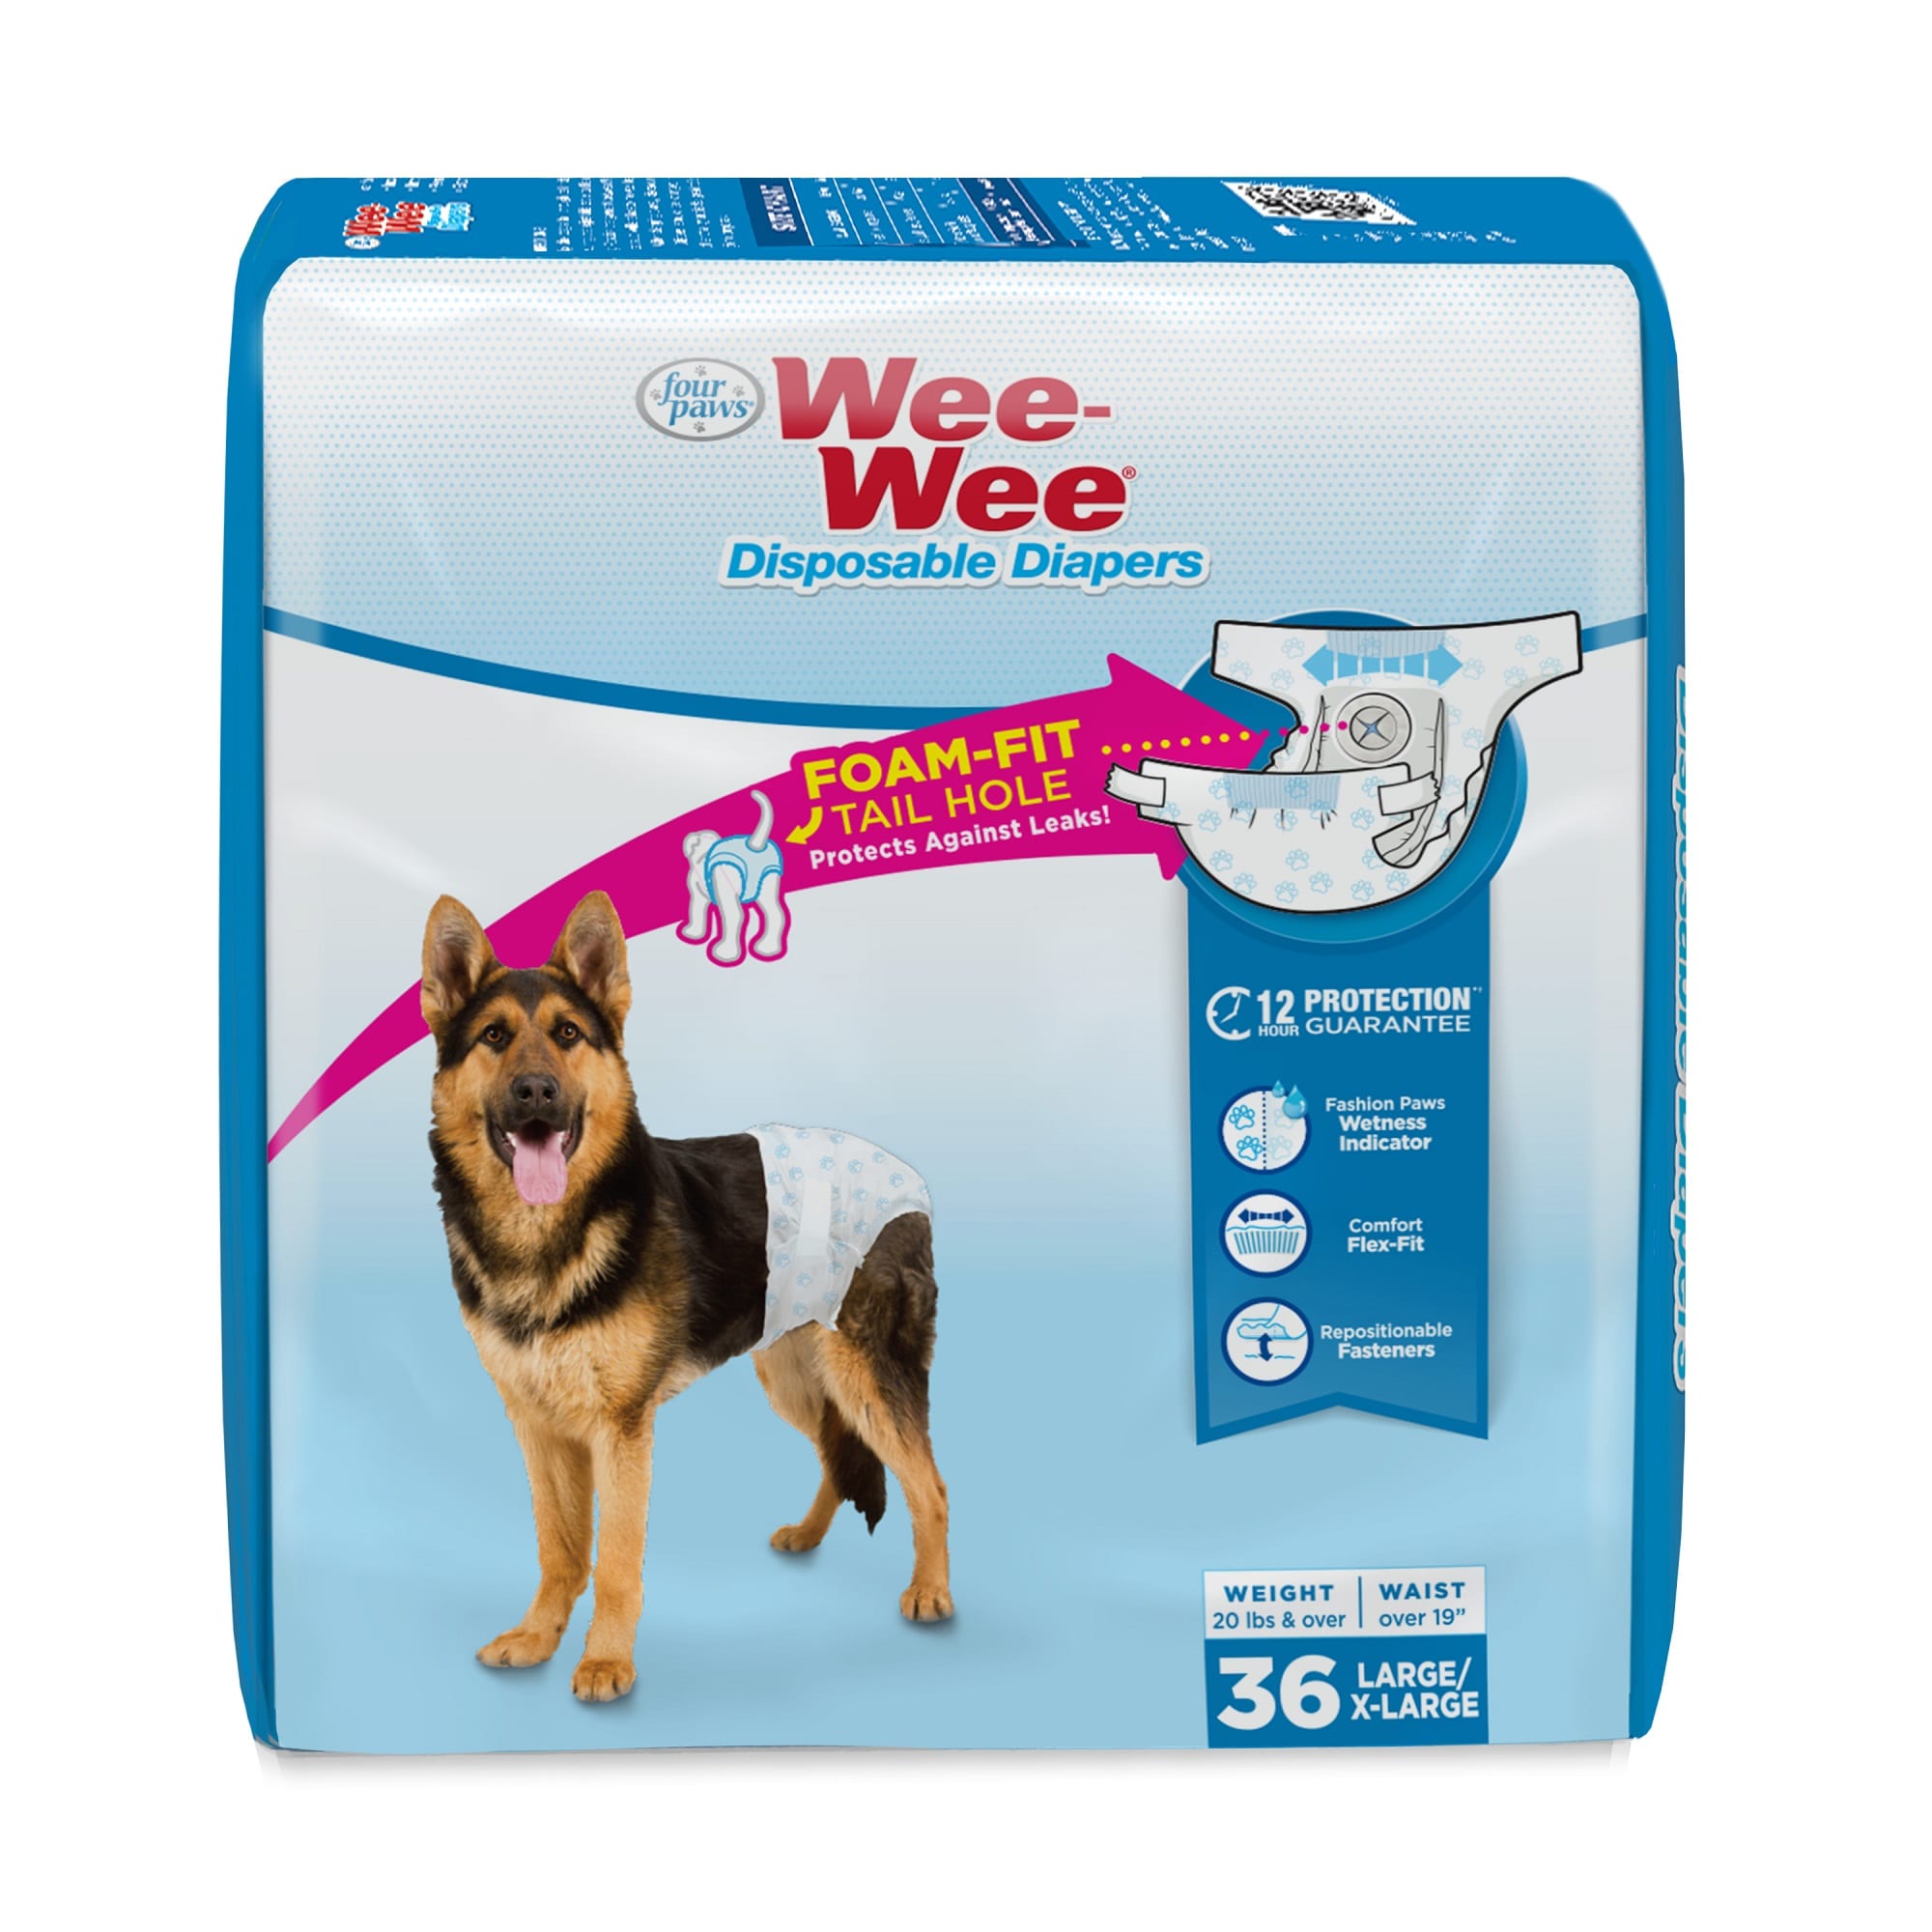 Wee-Wee Disposable Diapers for Dogs